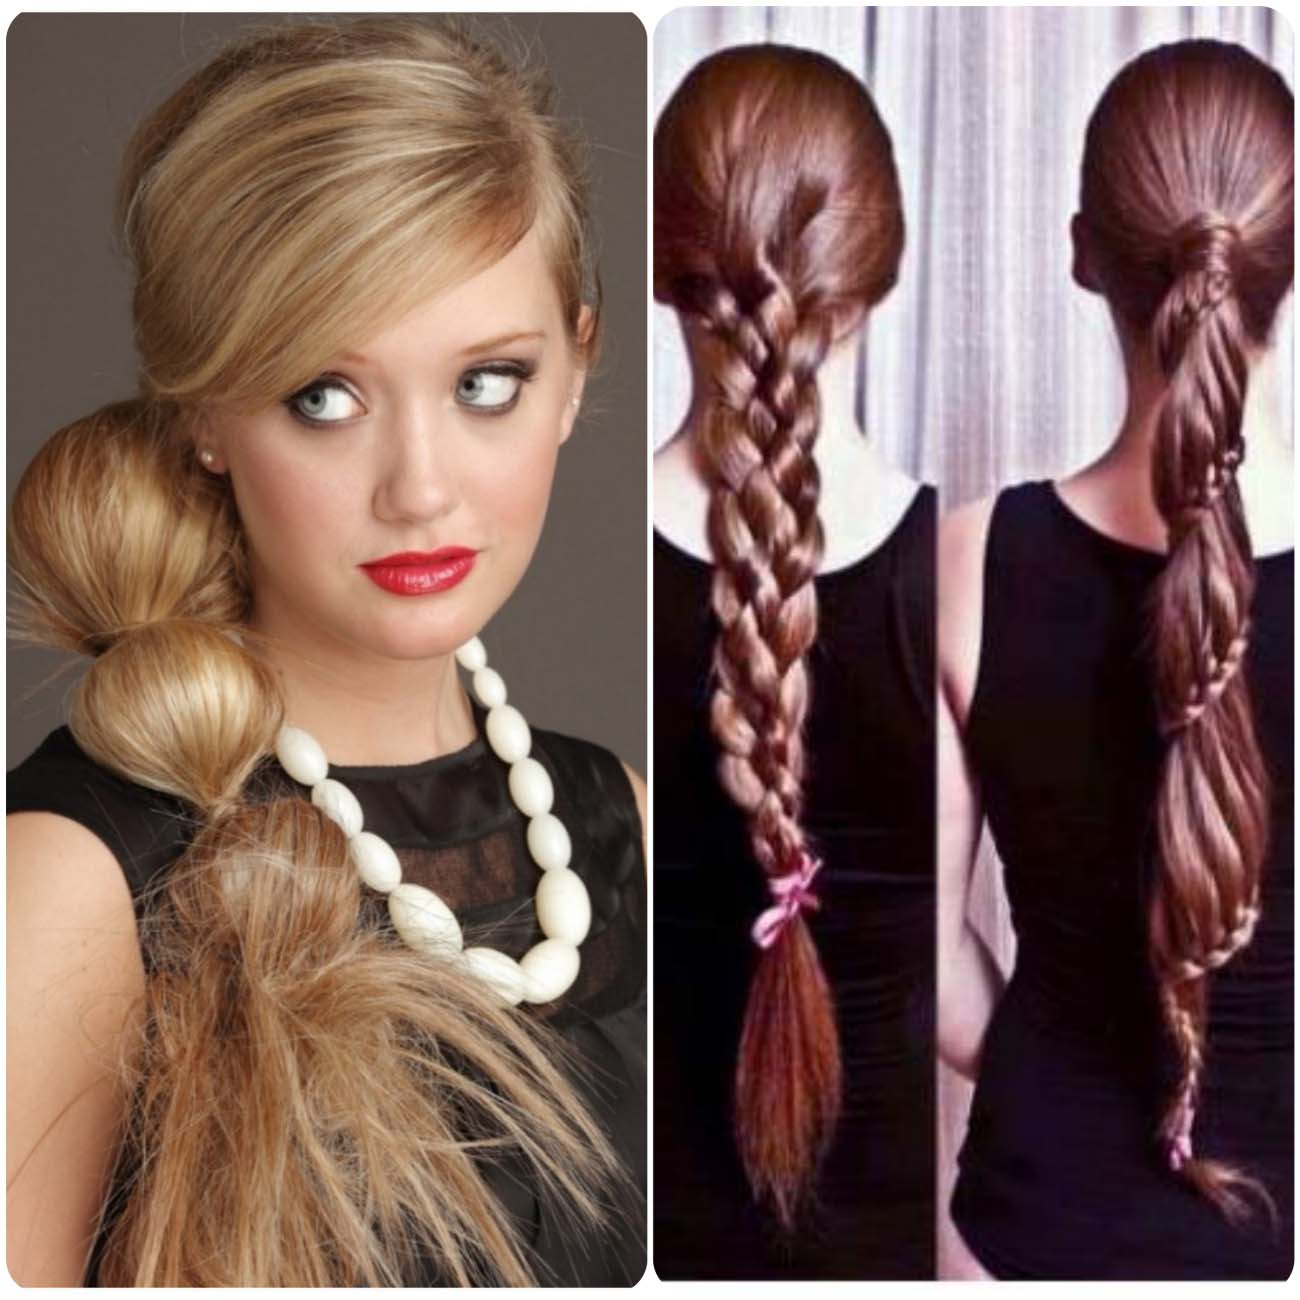 Top-Braid-Hairstyle-for-wintejr-2015-2_Fotor_Collage